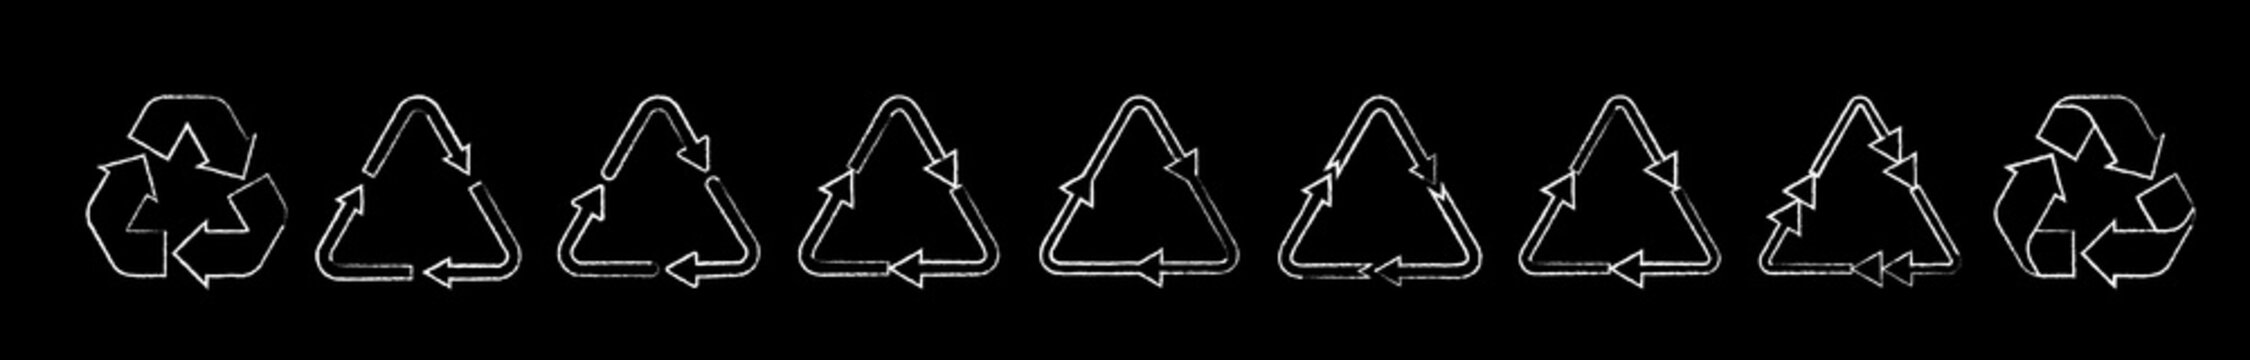 Chalked recycle triangle arrow symbols set vector illustration. White chalk style pictograms of reuse or recycling process, arrow cycle in triangle isolated on blackboard for enviromental infographic